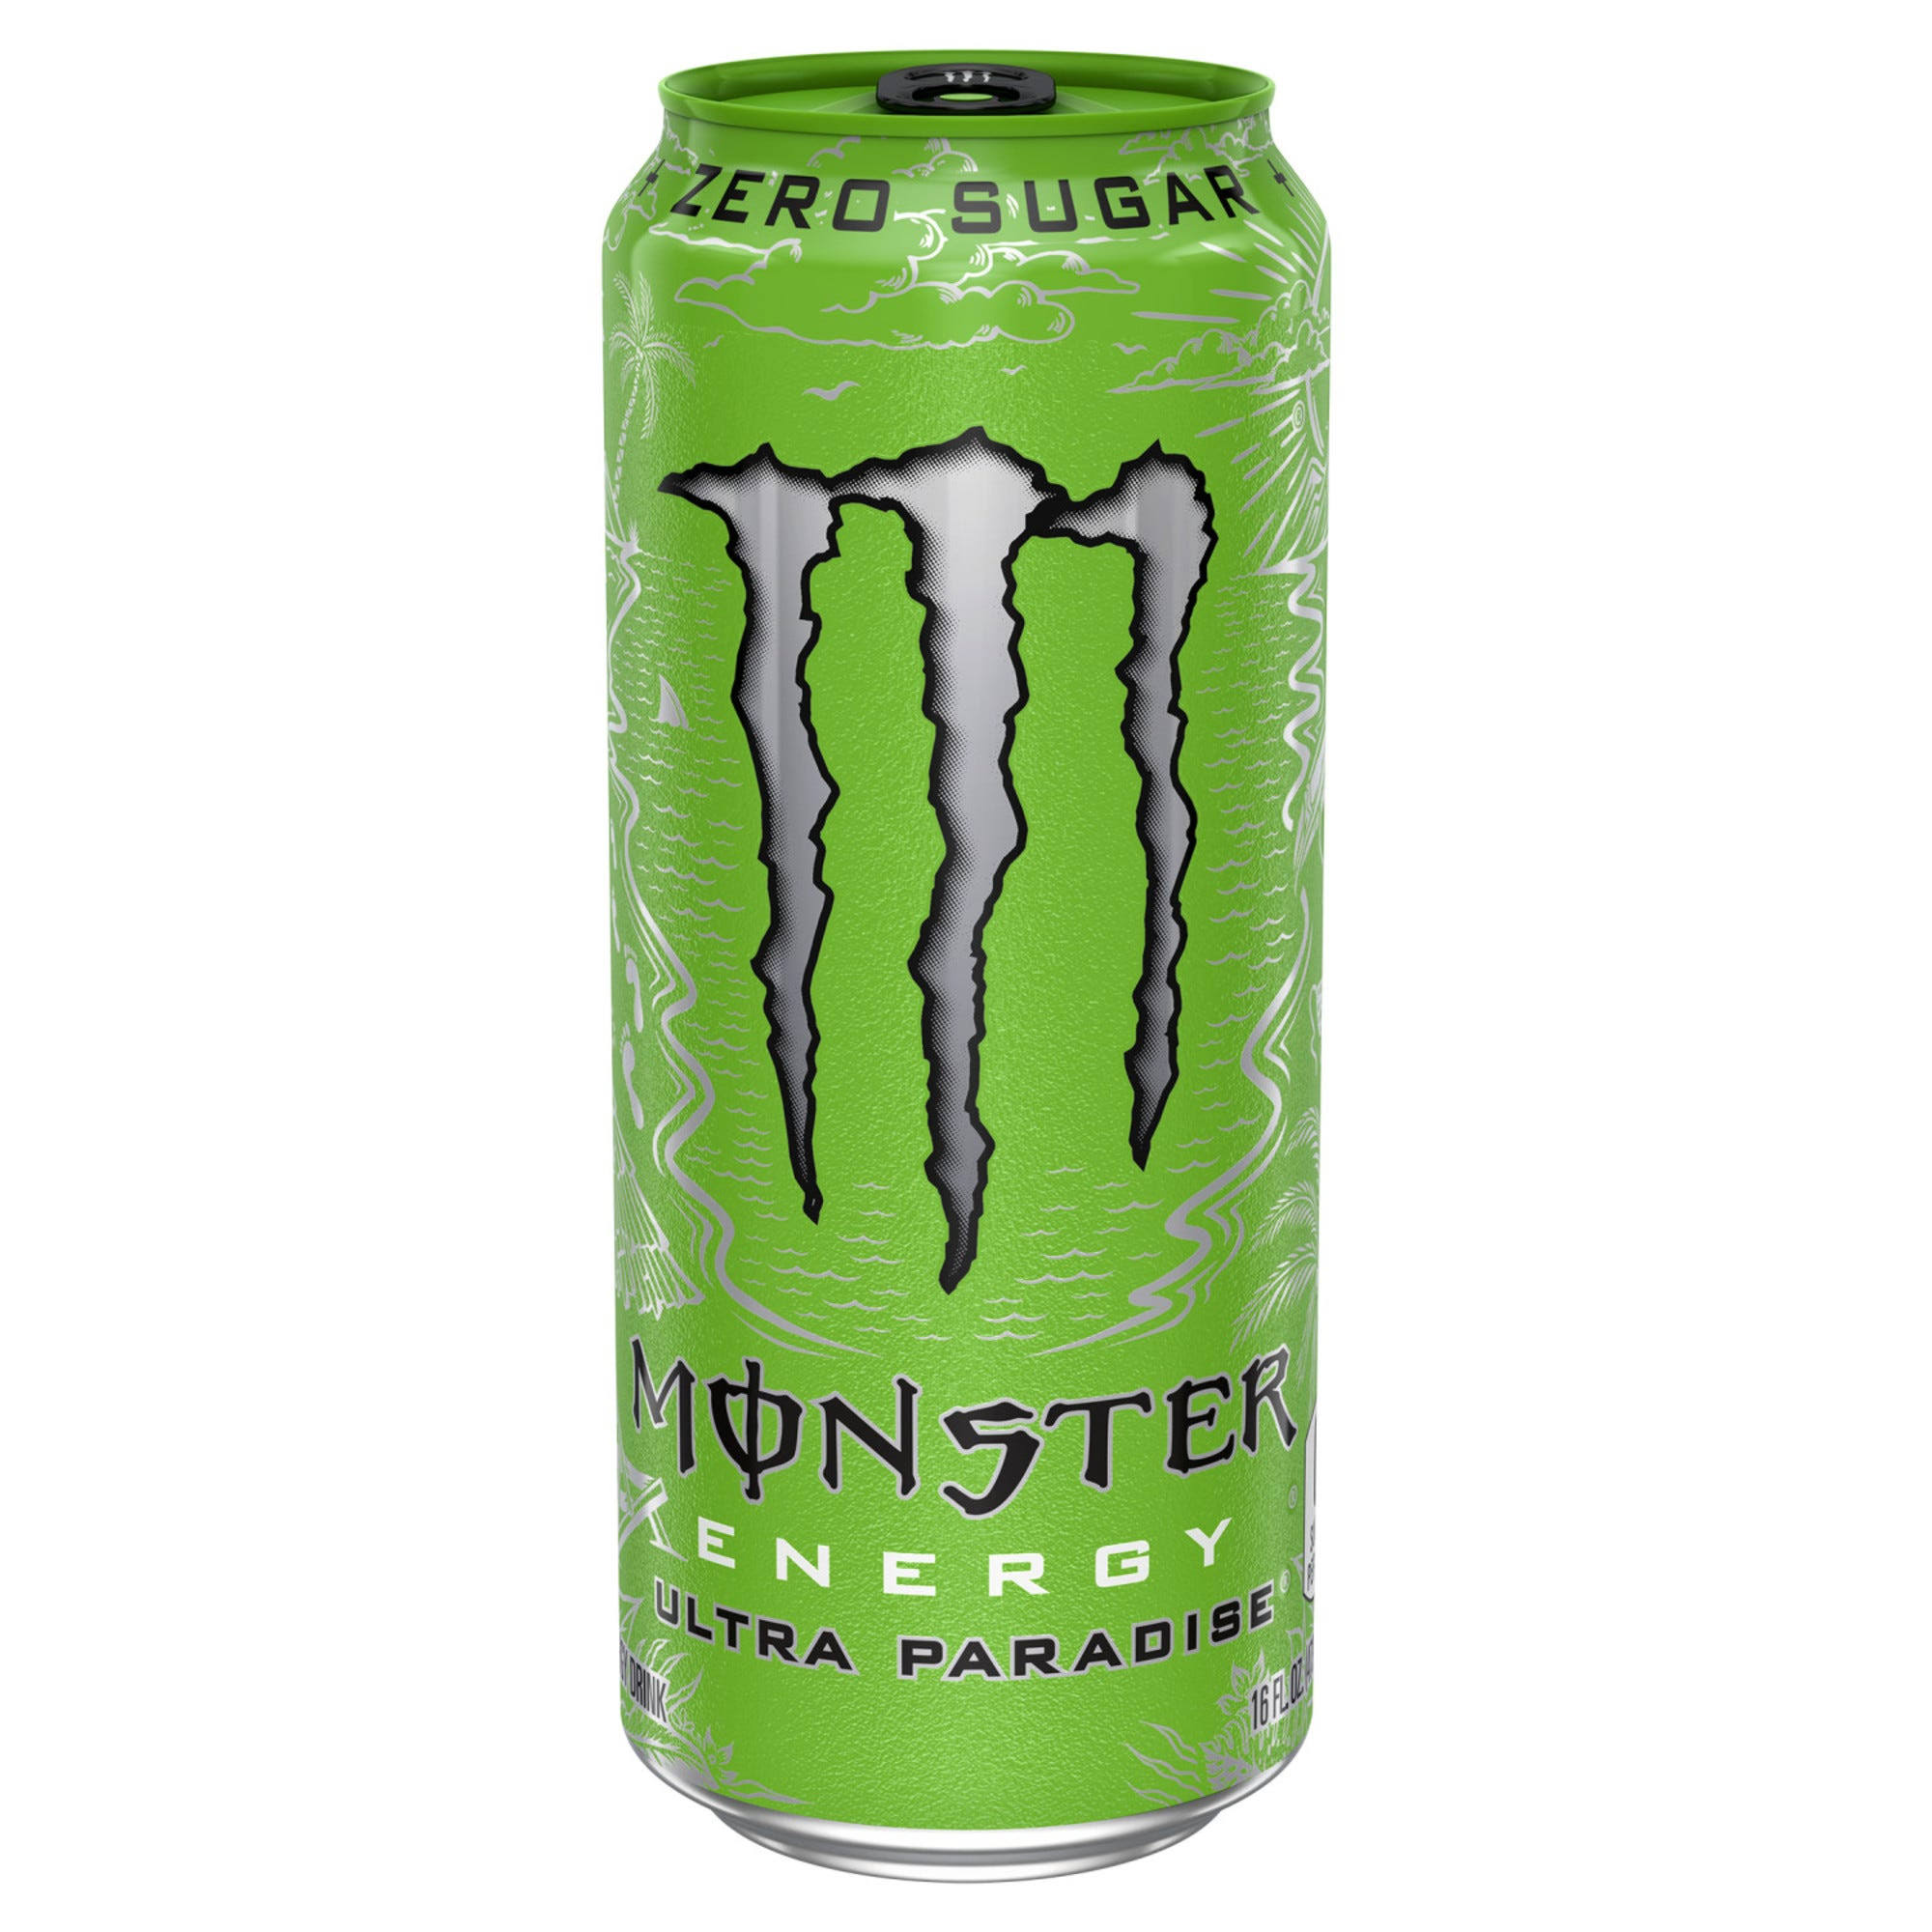 Monster Energy Ultra Paradise, Sugar Free Energy Drink, 16 Ounce (Pack of 24)